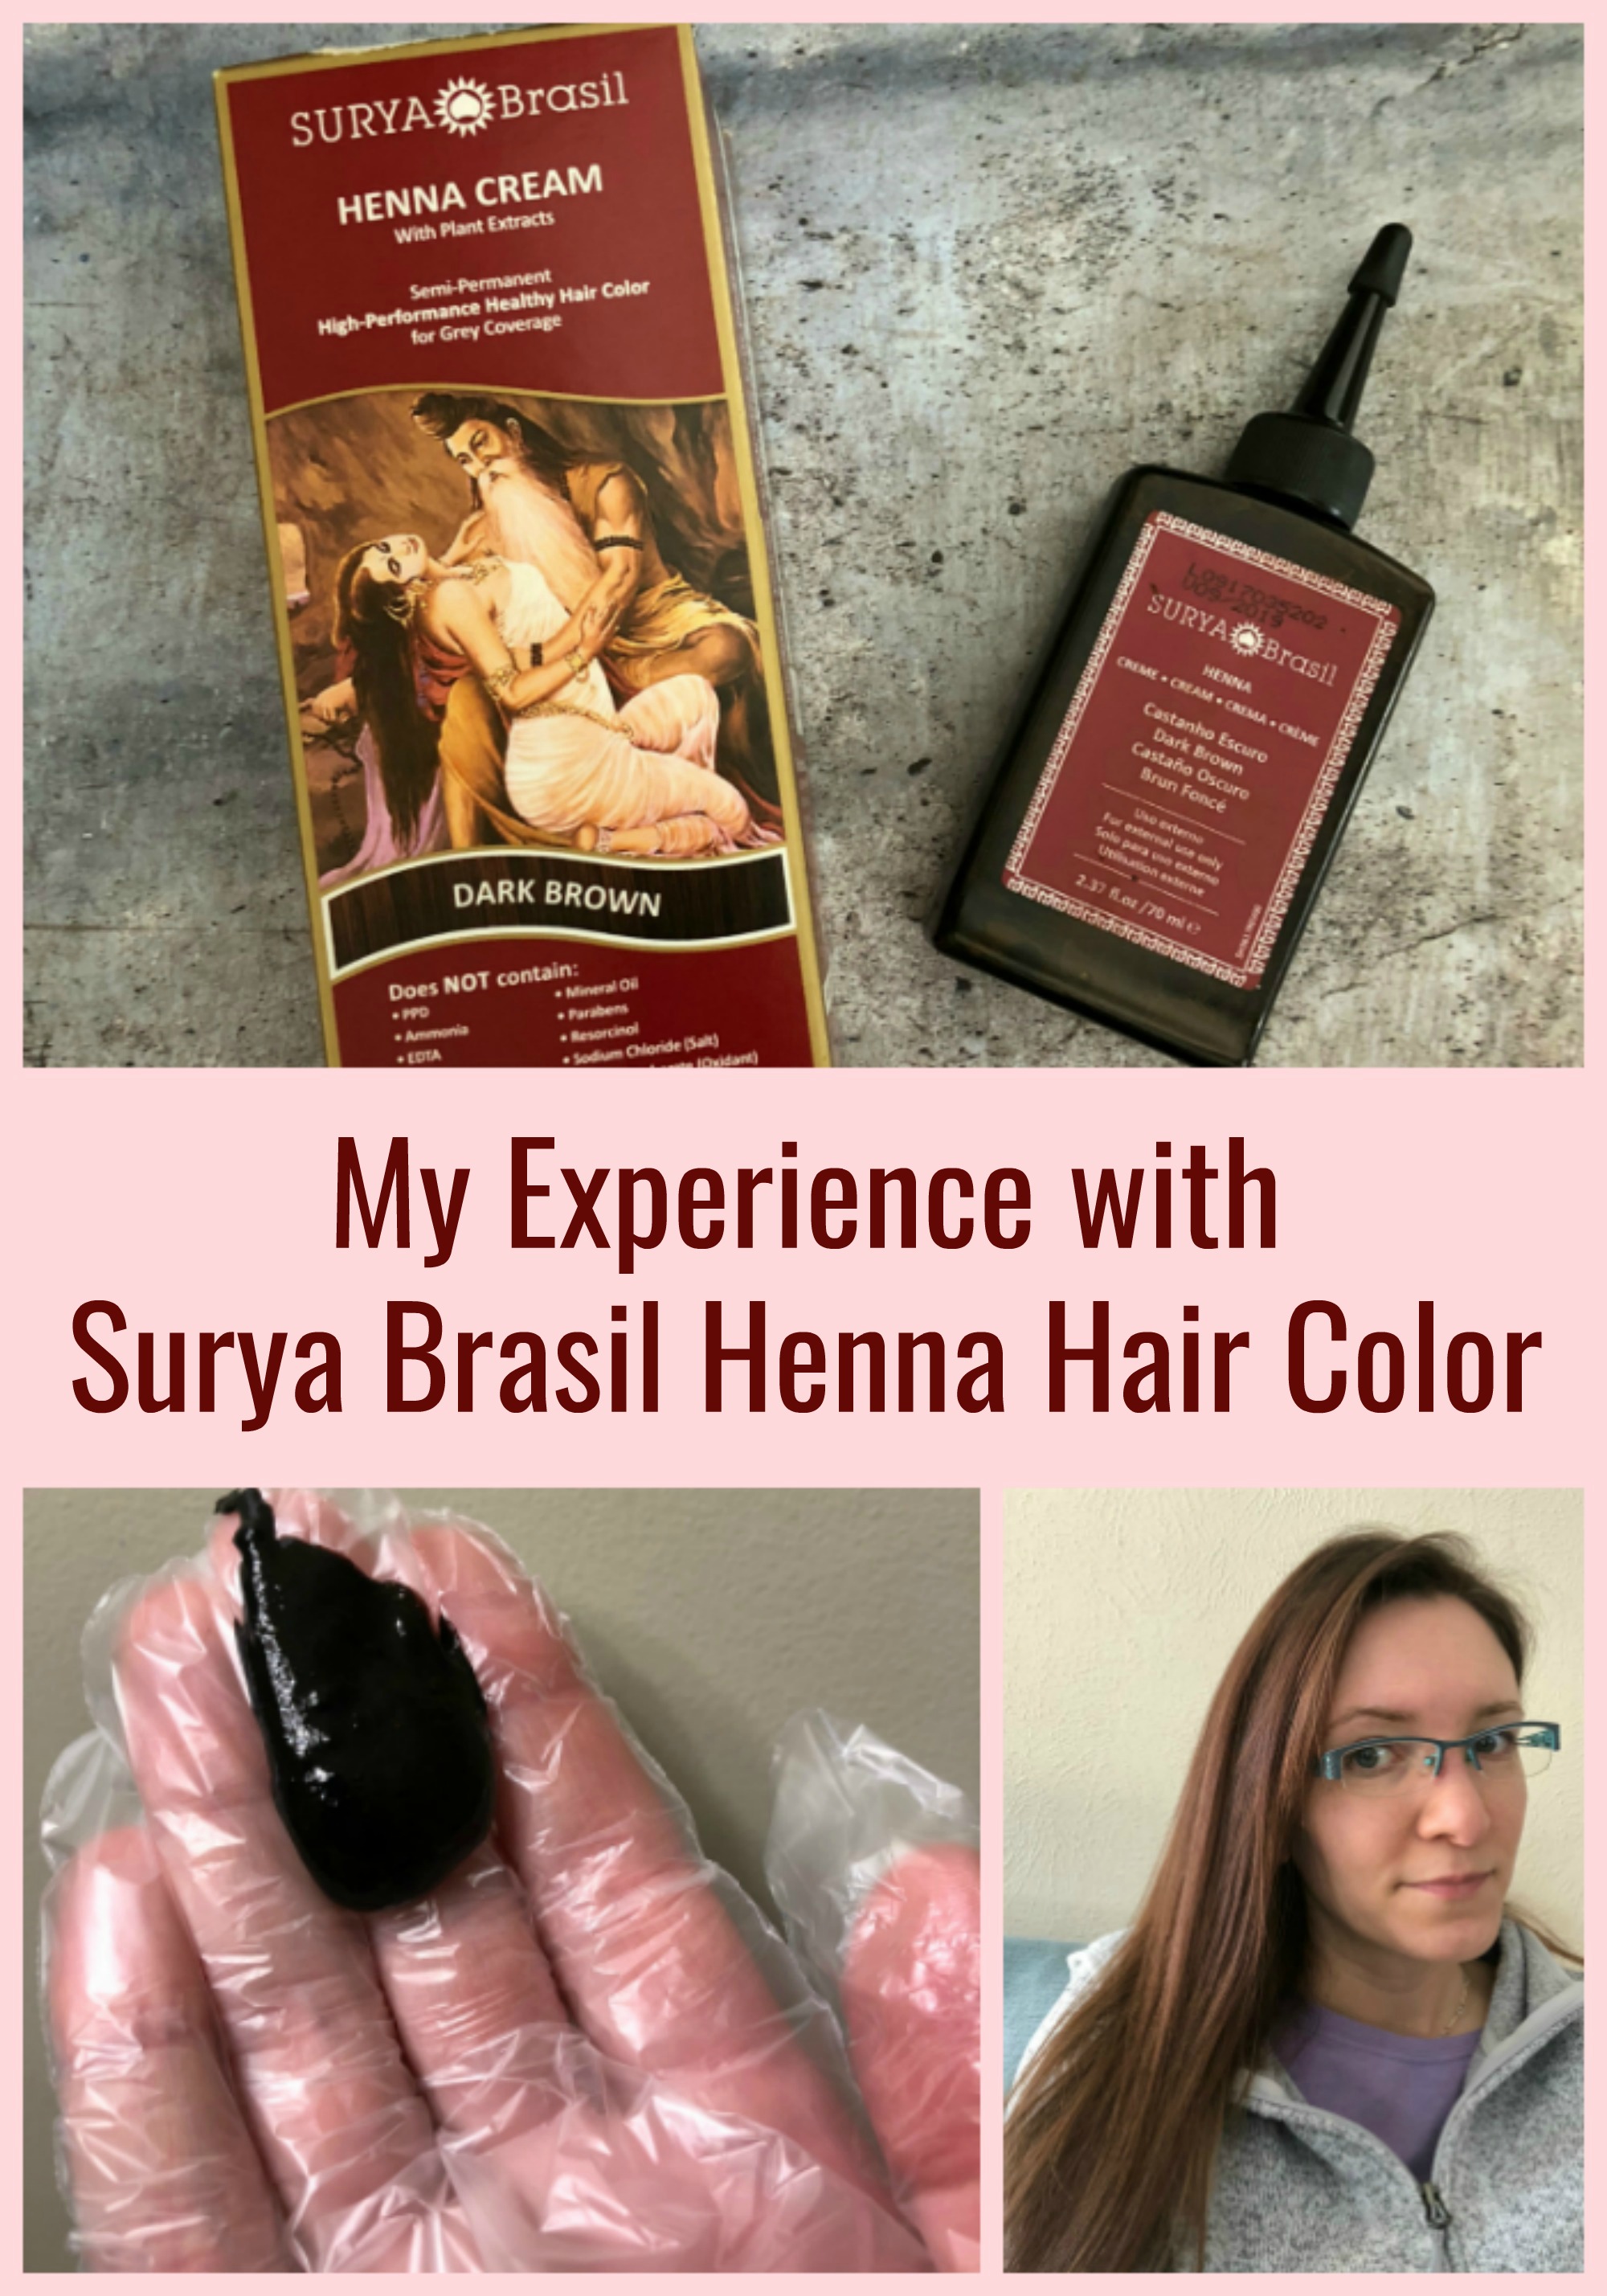 My Experience with Surya Brasil Henna Hair Color - A Nation of Moms